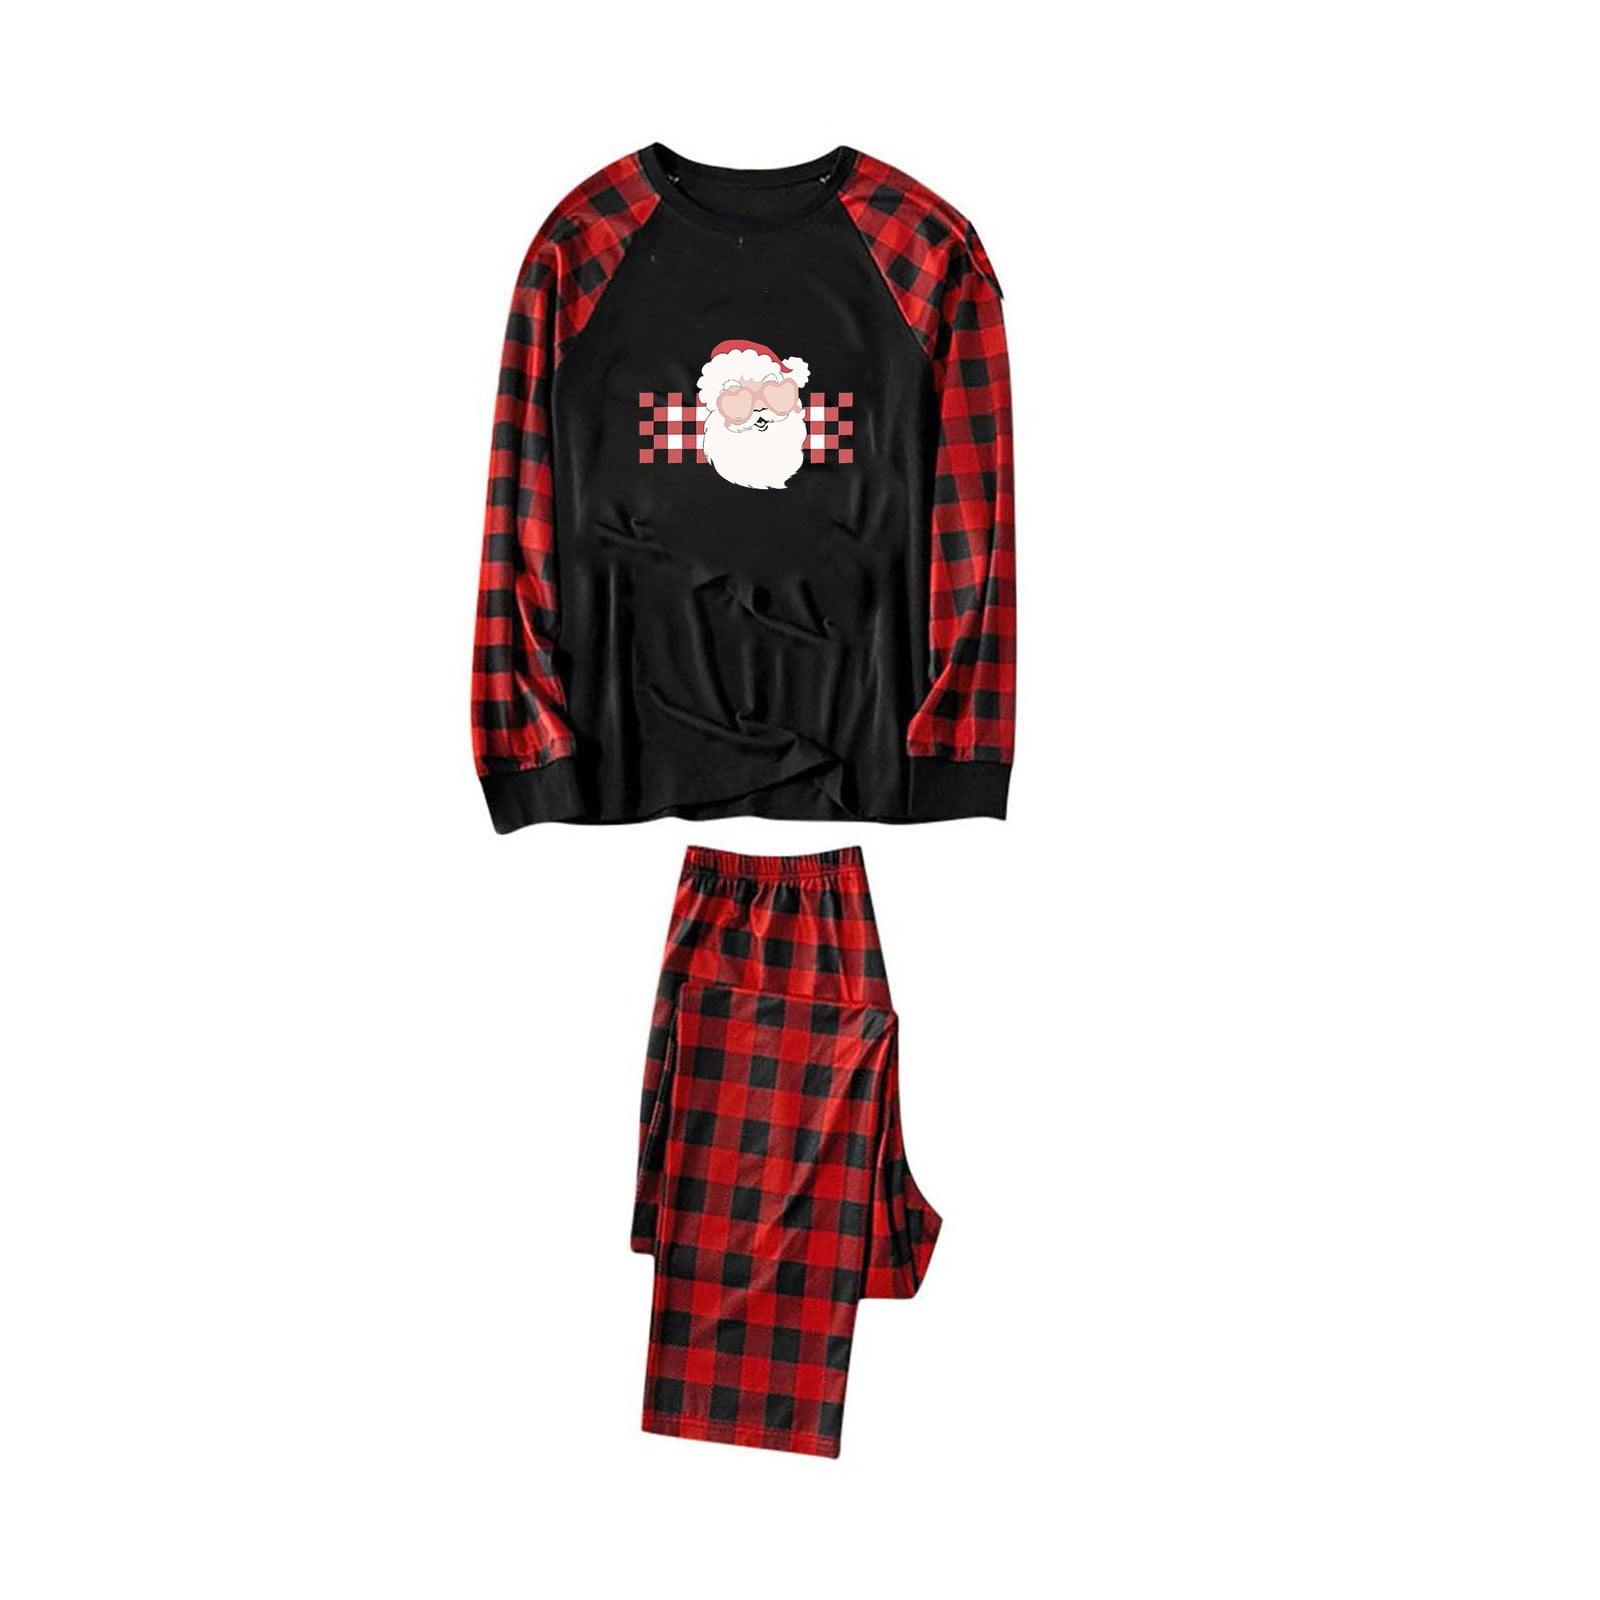 Virmaxy Christmas Pajamas for Family Matching Family Pajamas Sets Toddler  Kids Classic Plaid Sleepwear Letter Printed Long Sleeve Crew Neck Tops With